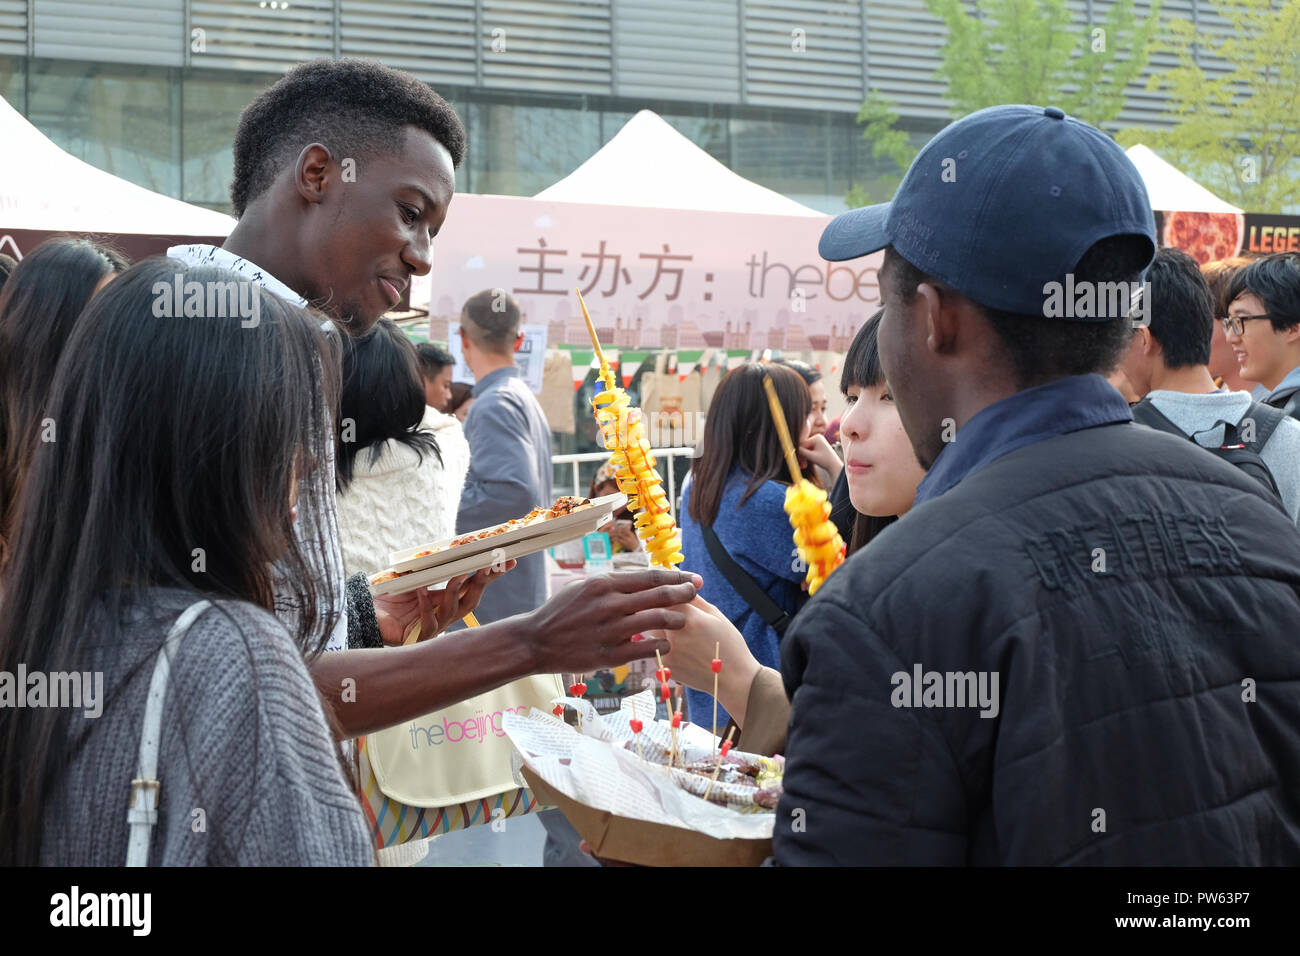 Beijing, China - October 13,2018: Expats and locals enjoying 2018 Beijing Pizza Festival at the Zhongguancun Software Park, Beijing, China. Fifth annual Beijing Pizza Festival on Oct 13-14 festival organized by The Beijinger - free monthly listings and entertainment website and magazine produced by True Run Media in Beijing, China. Stock Photo